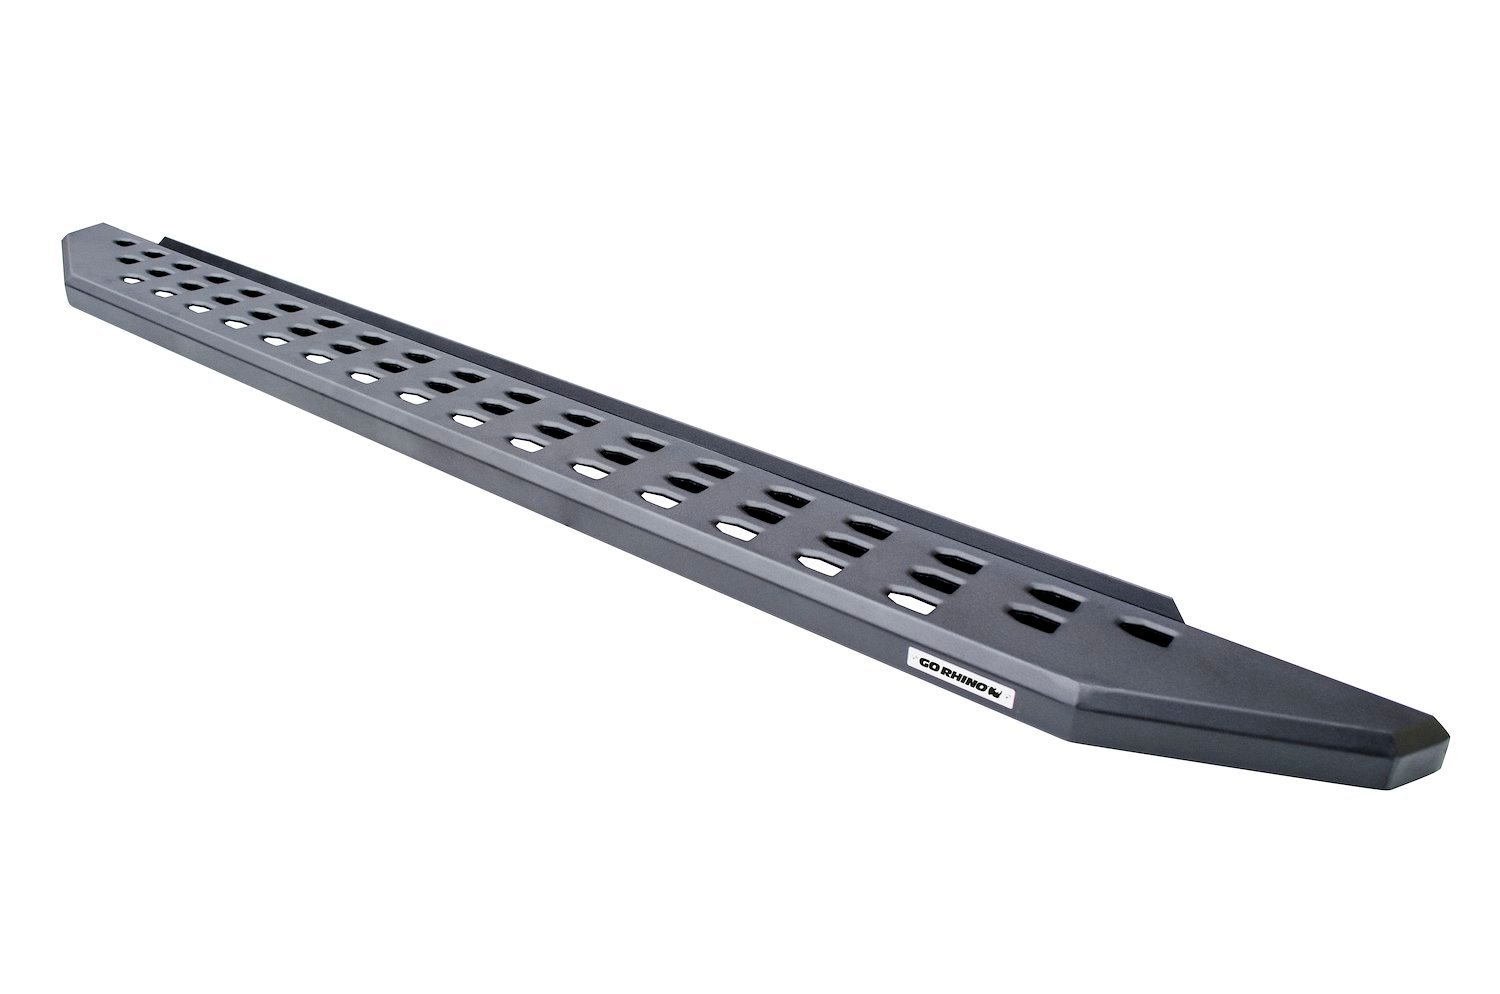 RB20 Running boards for 1999-2016 Ford F250/F350